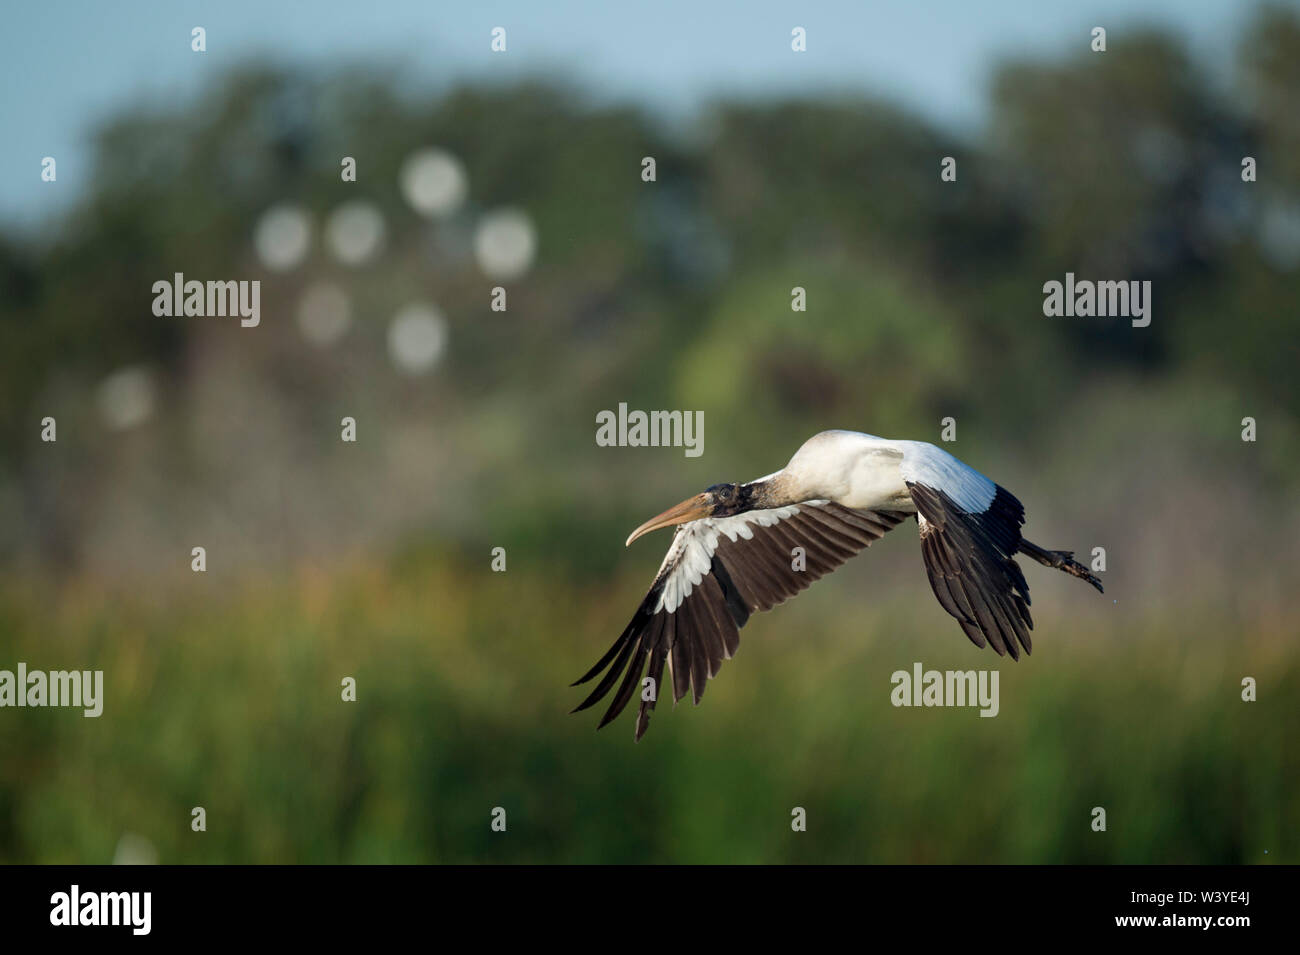 A juvenile Wood Stork flies in front of green grasses and trees in the bright sunlight. Stock Photo